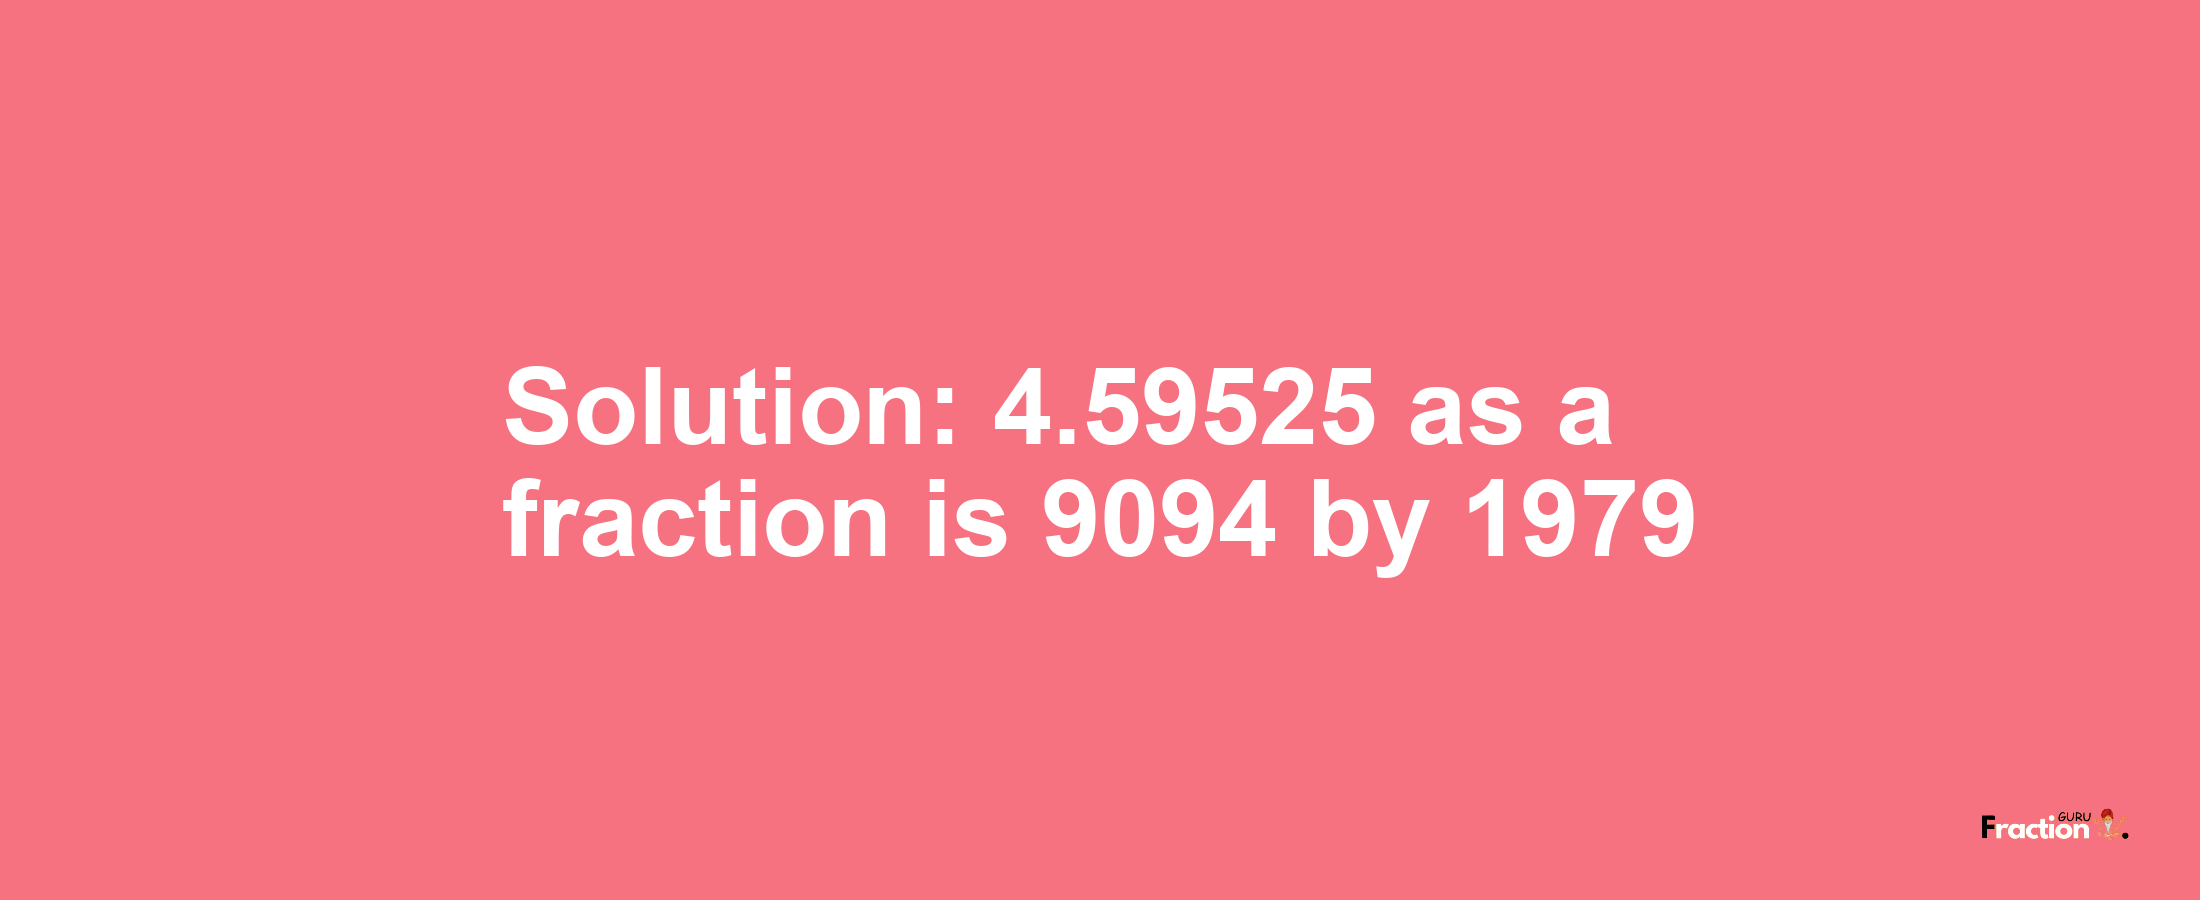 Solution:4.59525 as a fraction is 9094/1979